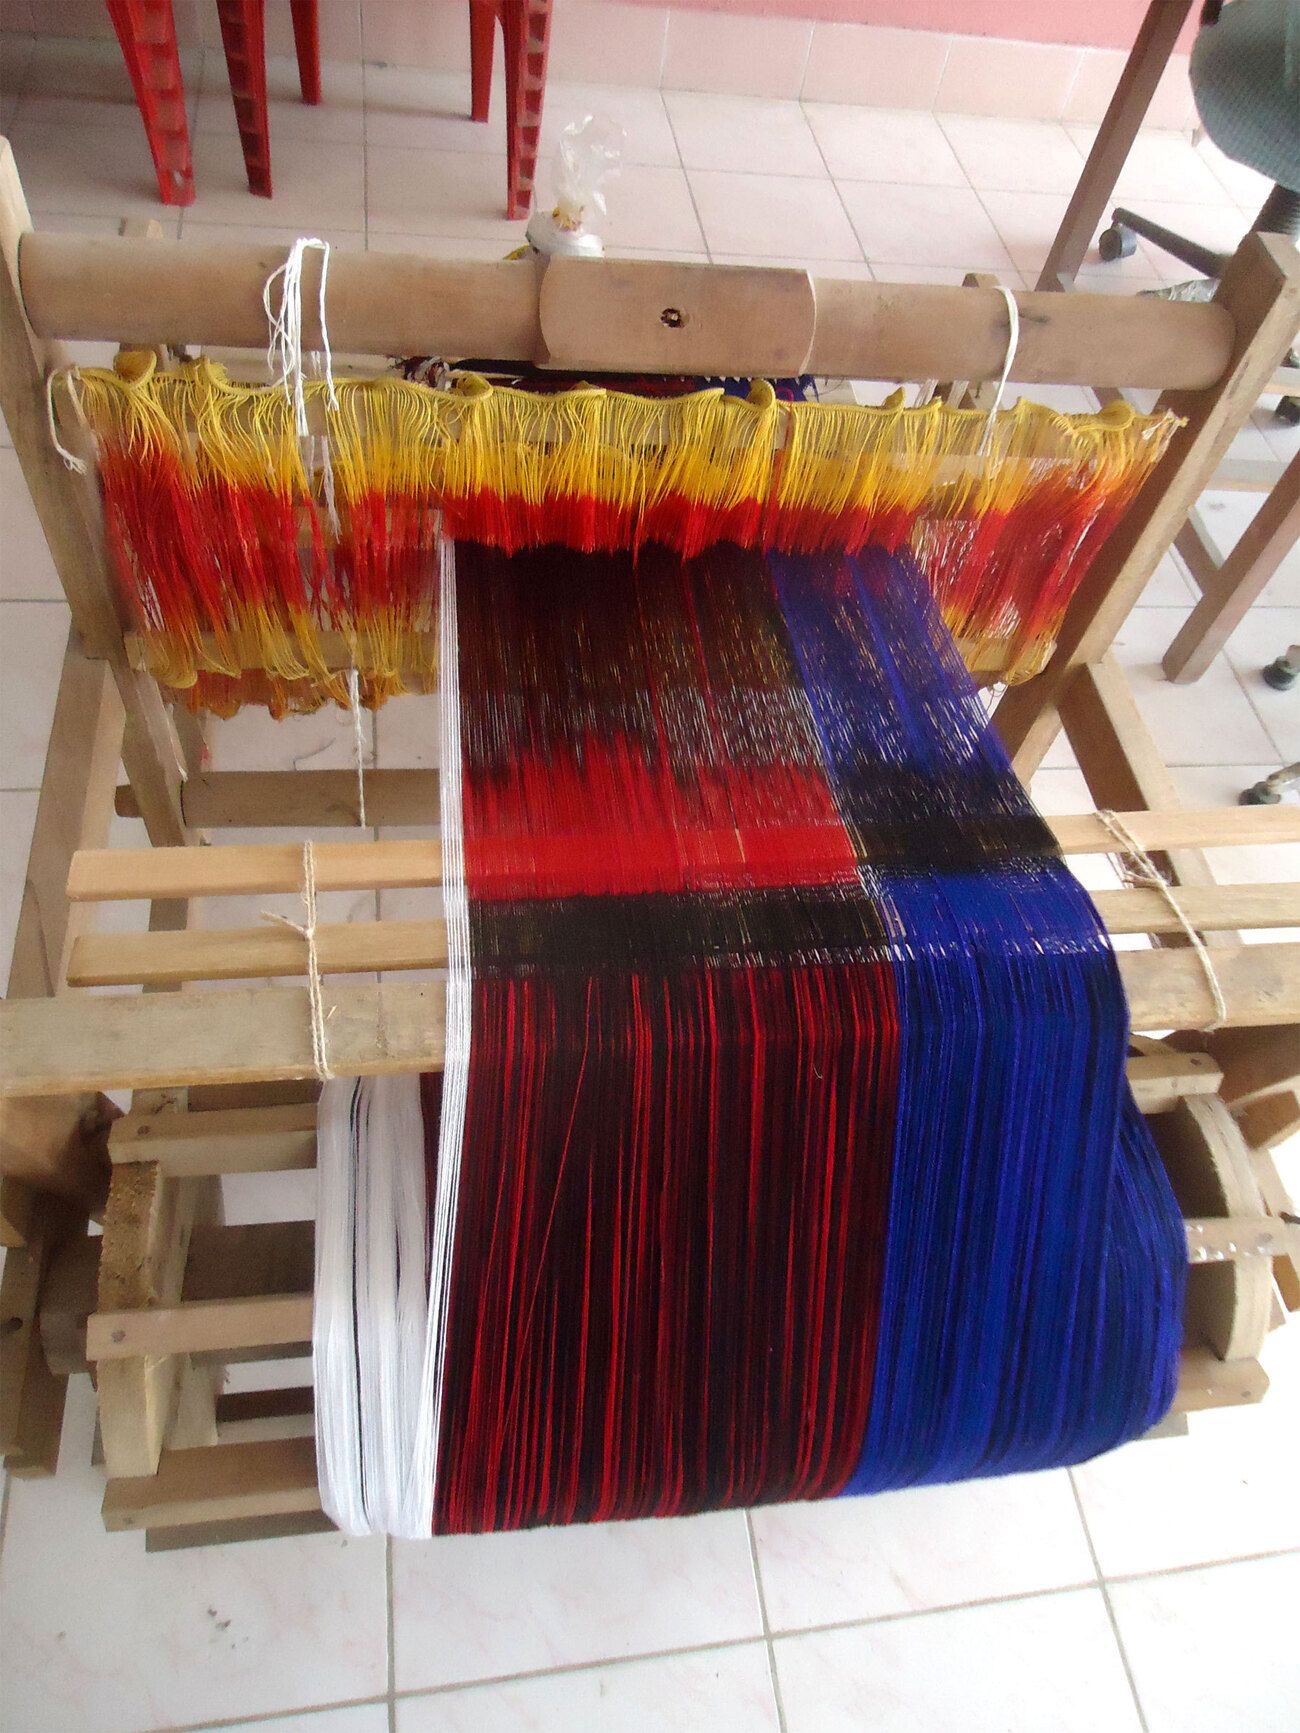 This is a traditional dress weaving technique of the Apatani tribe in Ziro. They believe in a disciplined life which is evident from their intricate zigzag and angular fabric weaving pattern